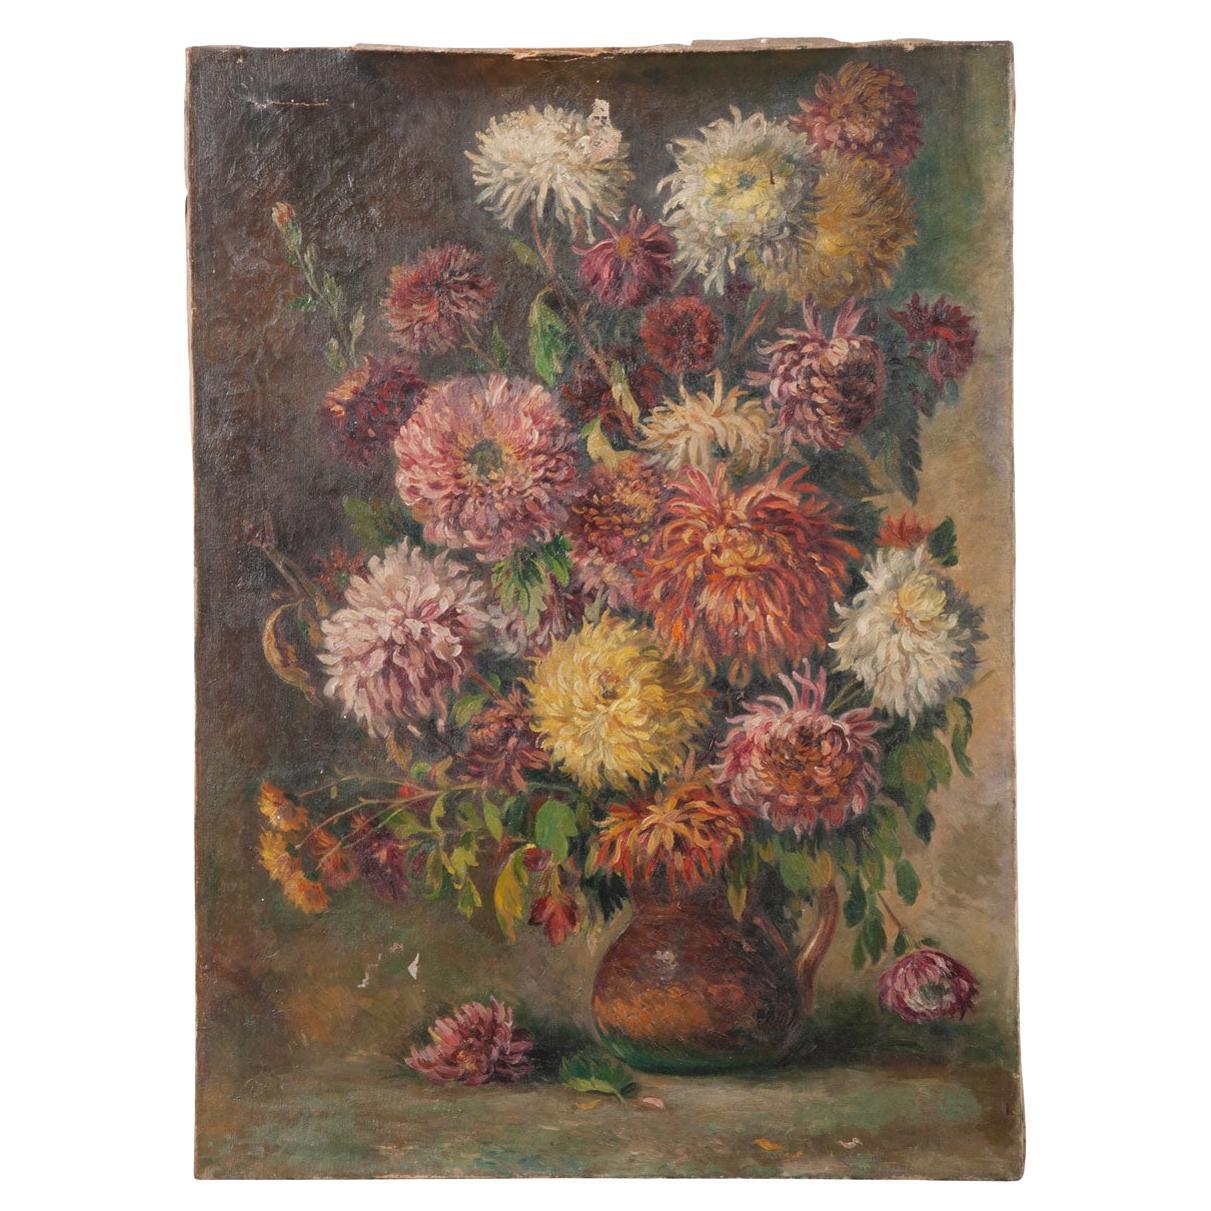 19th Century French Painting of Mums